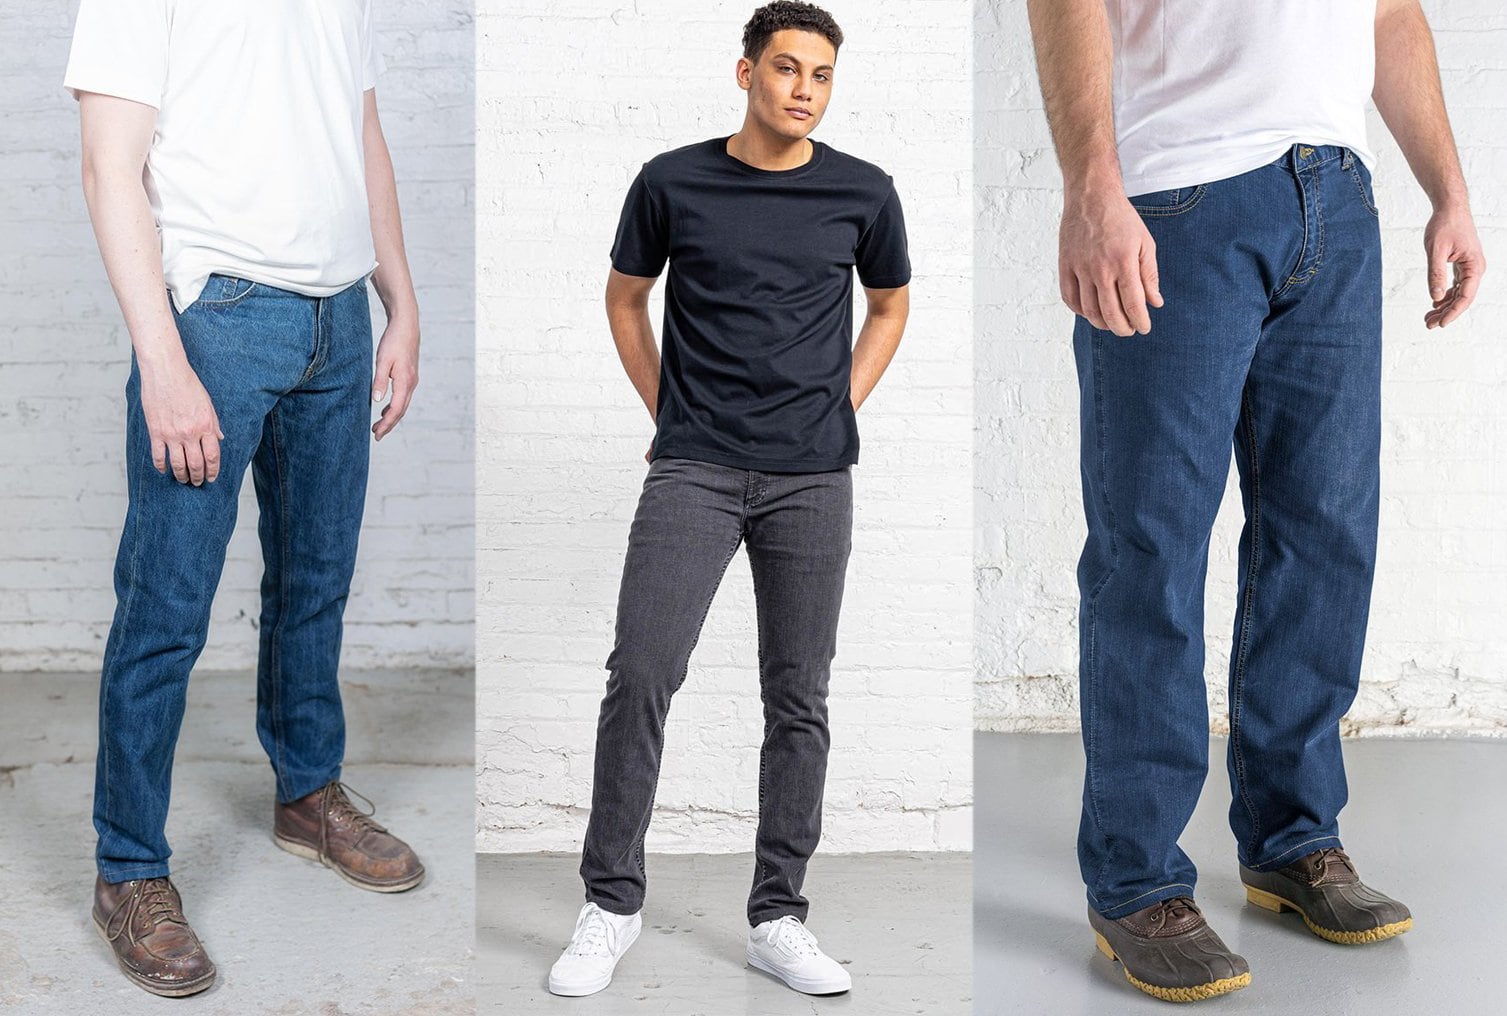 Dearborn Denim offers men's jeans in Tailored Fit, $65 - $70; Slim Fit, $65 - $75; and Relaxed Fit, $65 - $75